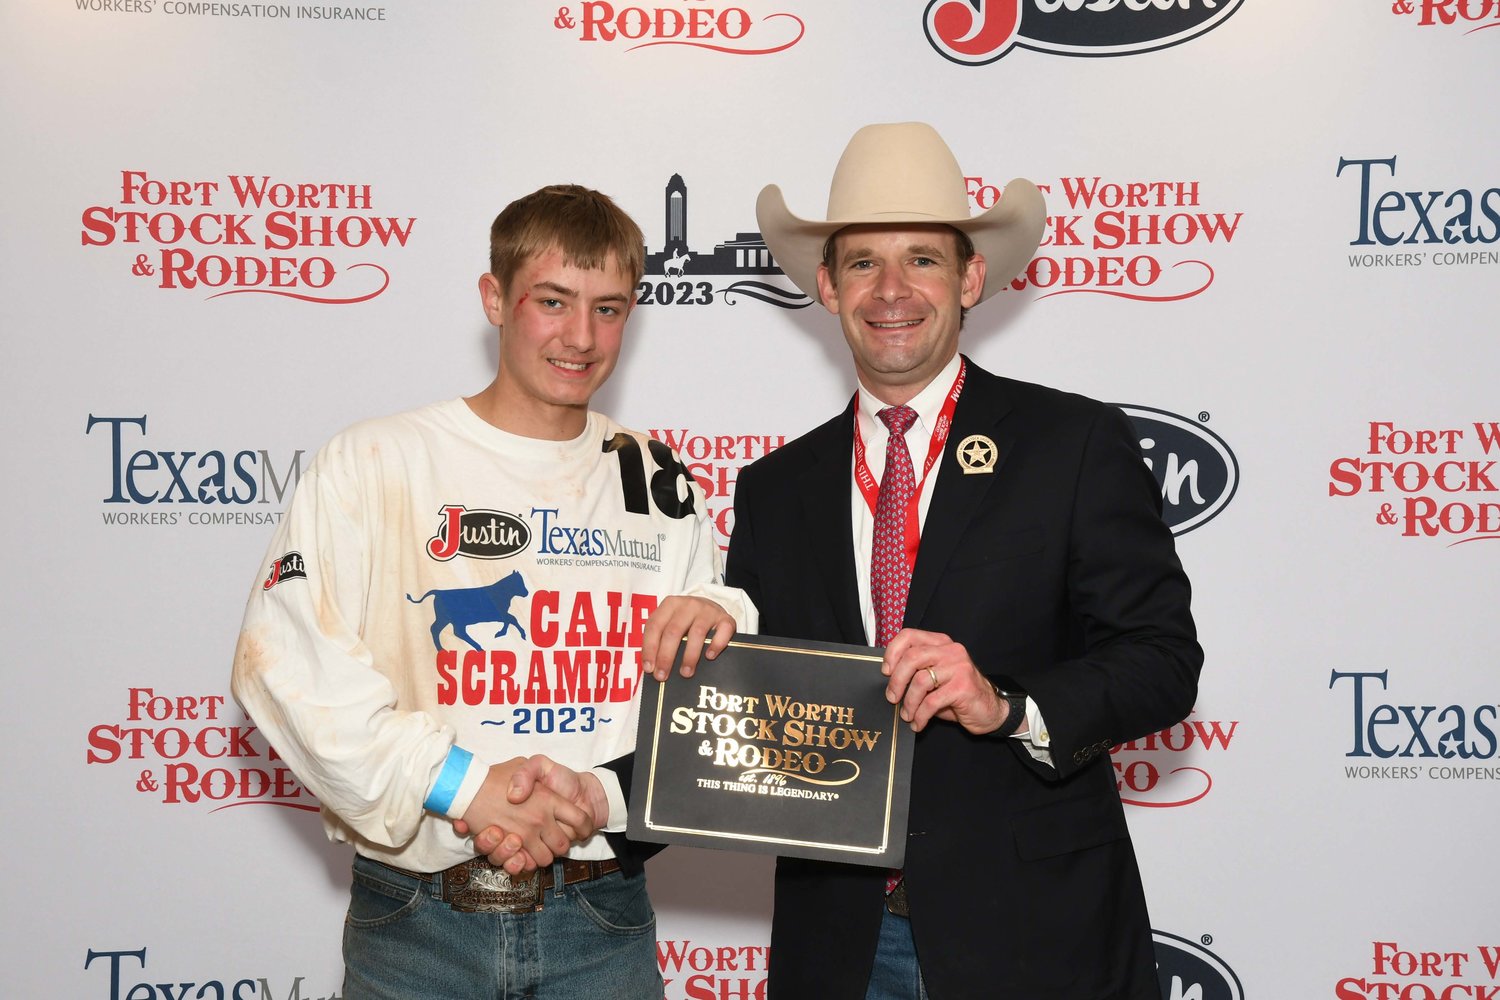 Mason Williams of Quitman FFA won a $500 purchase certificate in the Fort Worth Stock Show & Rodeo calf scramble Jan. 28 toward a beef or dairy heifer for a 4-H or FFA project for exhibition at next year’s show. The certificate, presented by Stock Show Calf Scramble Committee member, Paxton Motheral, was sponsored by Payton and Lindsay Reese. Williams’s mother is Marlena Gallender of Quitman.